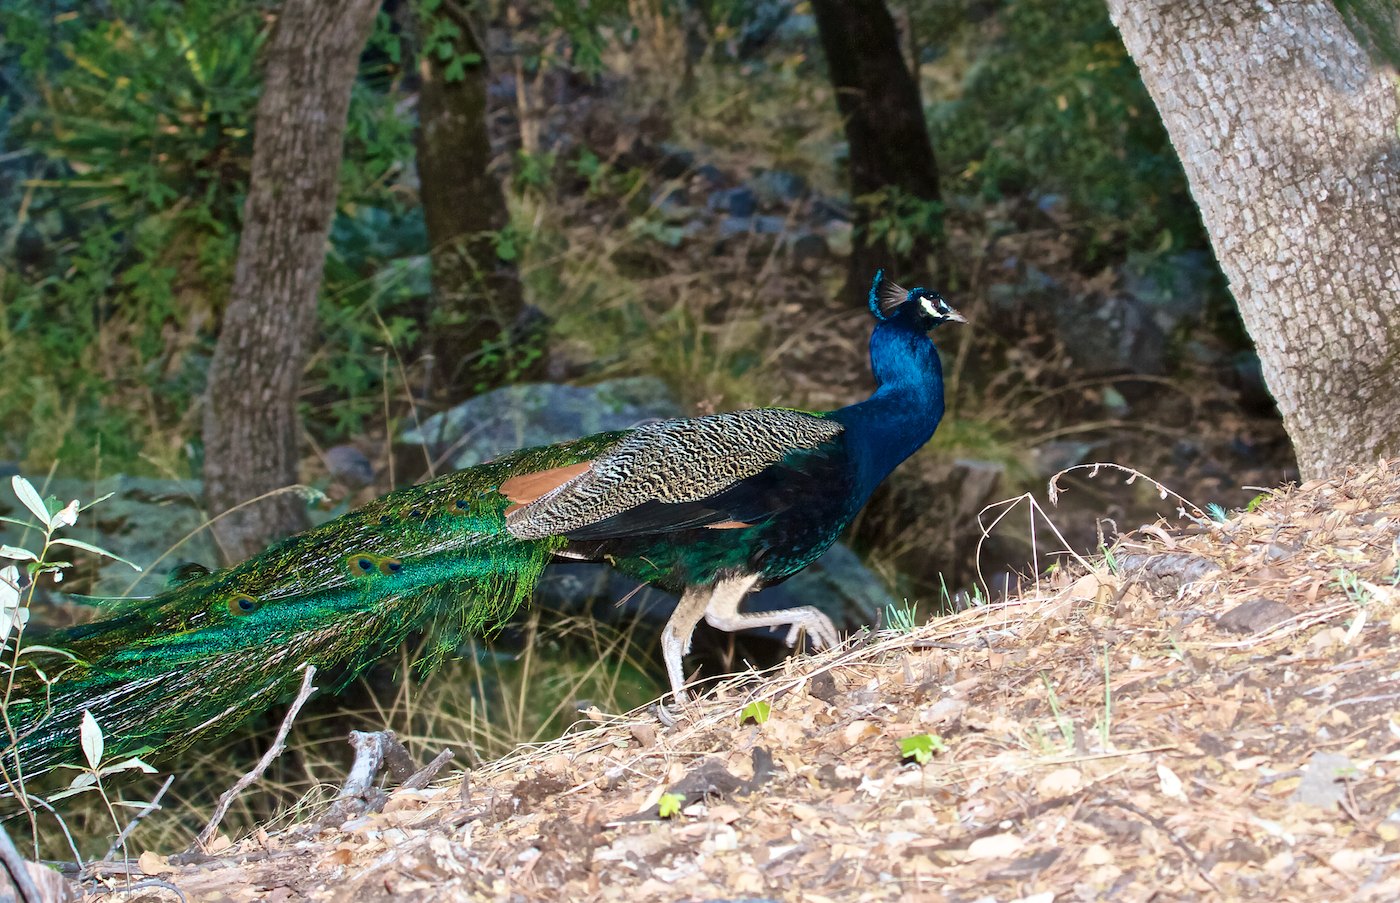 This Lone Male Peacock (Pavo cristatus) Has Lived for About 20 Years Among the Wild Turkeys in Ramsey Canyon